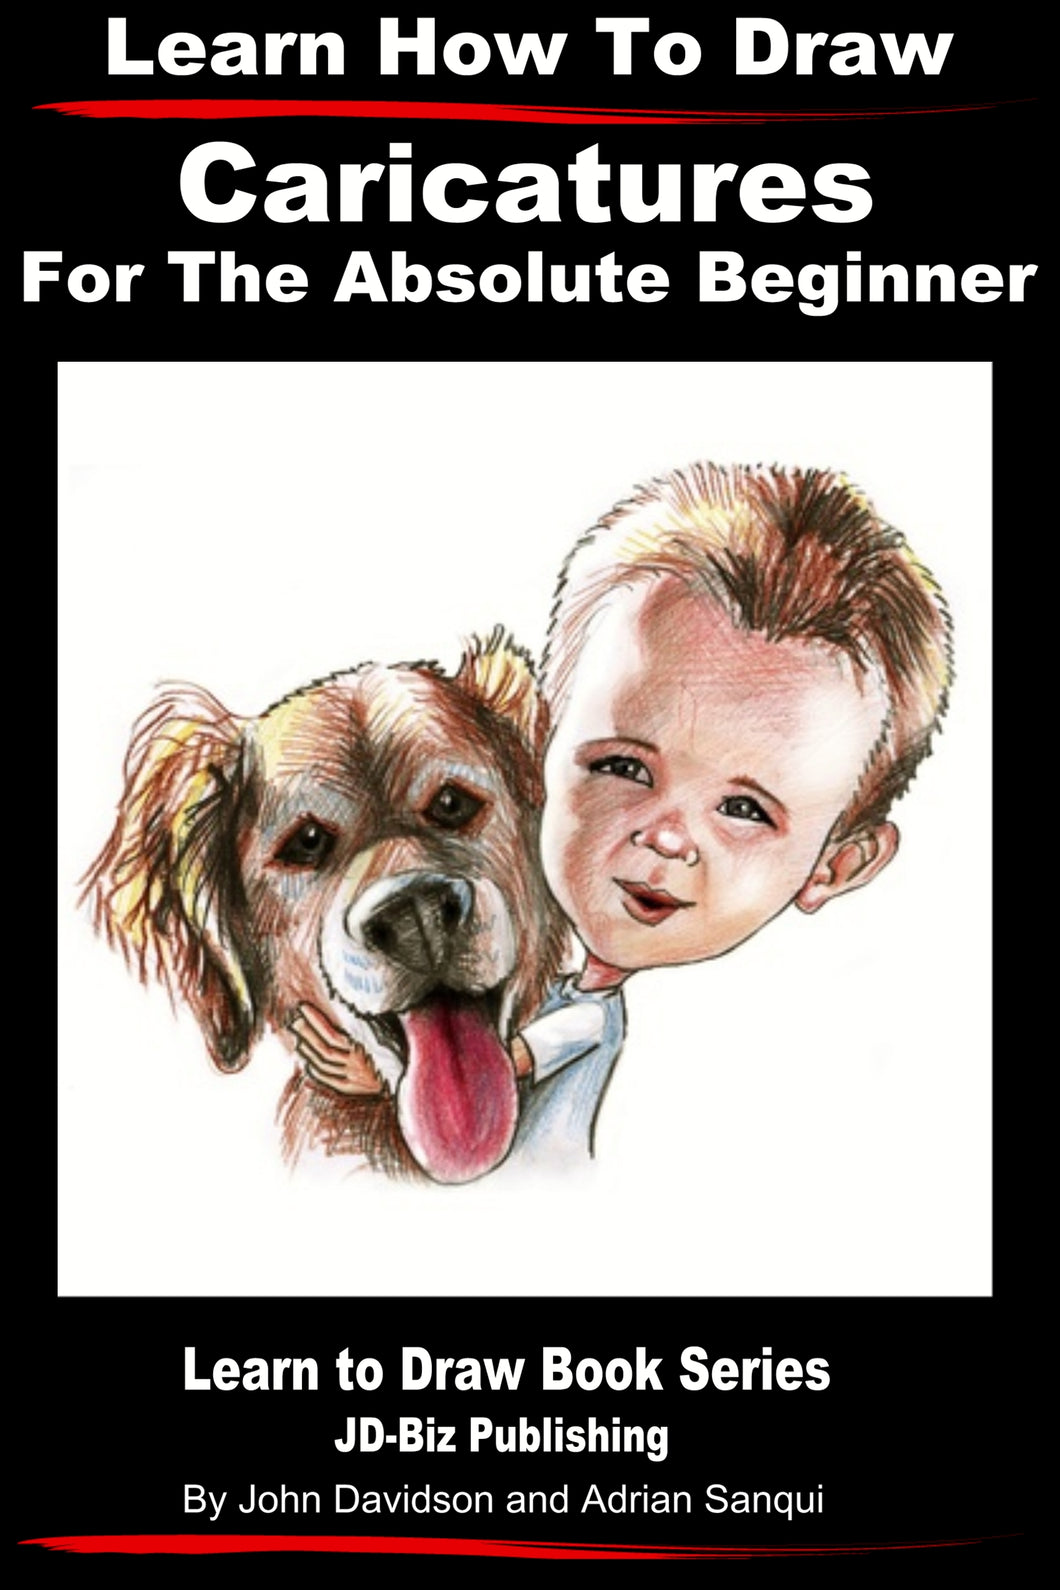 Learn How to Draw Caricatures - For the Absolute Beginner